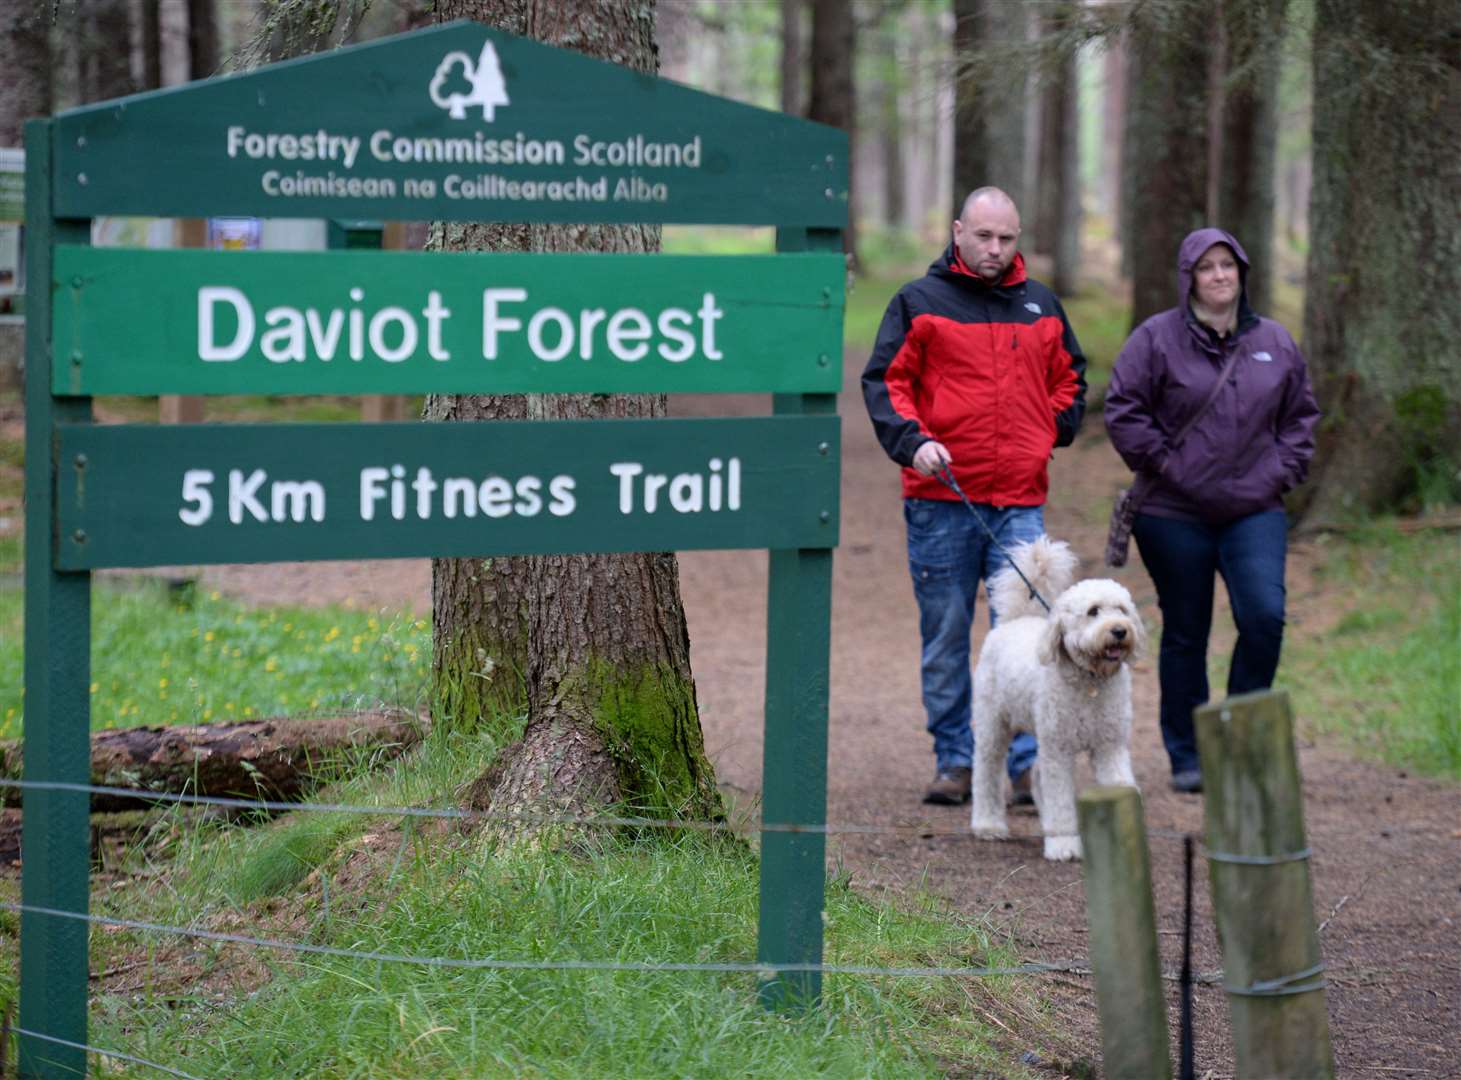 Enjoy a walk at Daviot before heading for the cafe there.